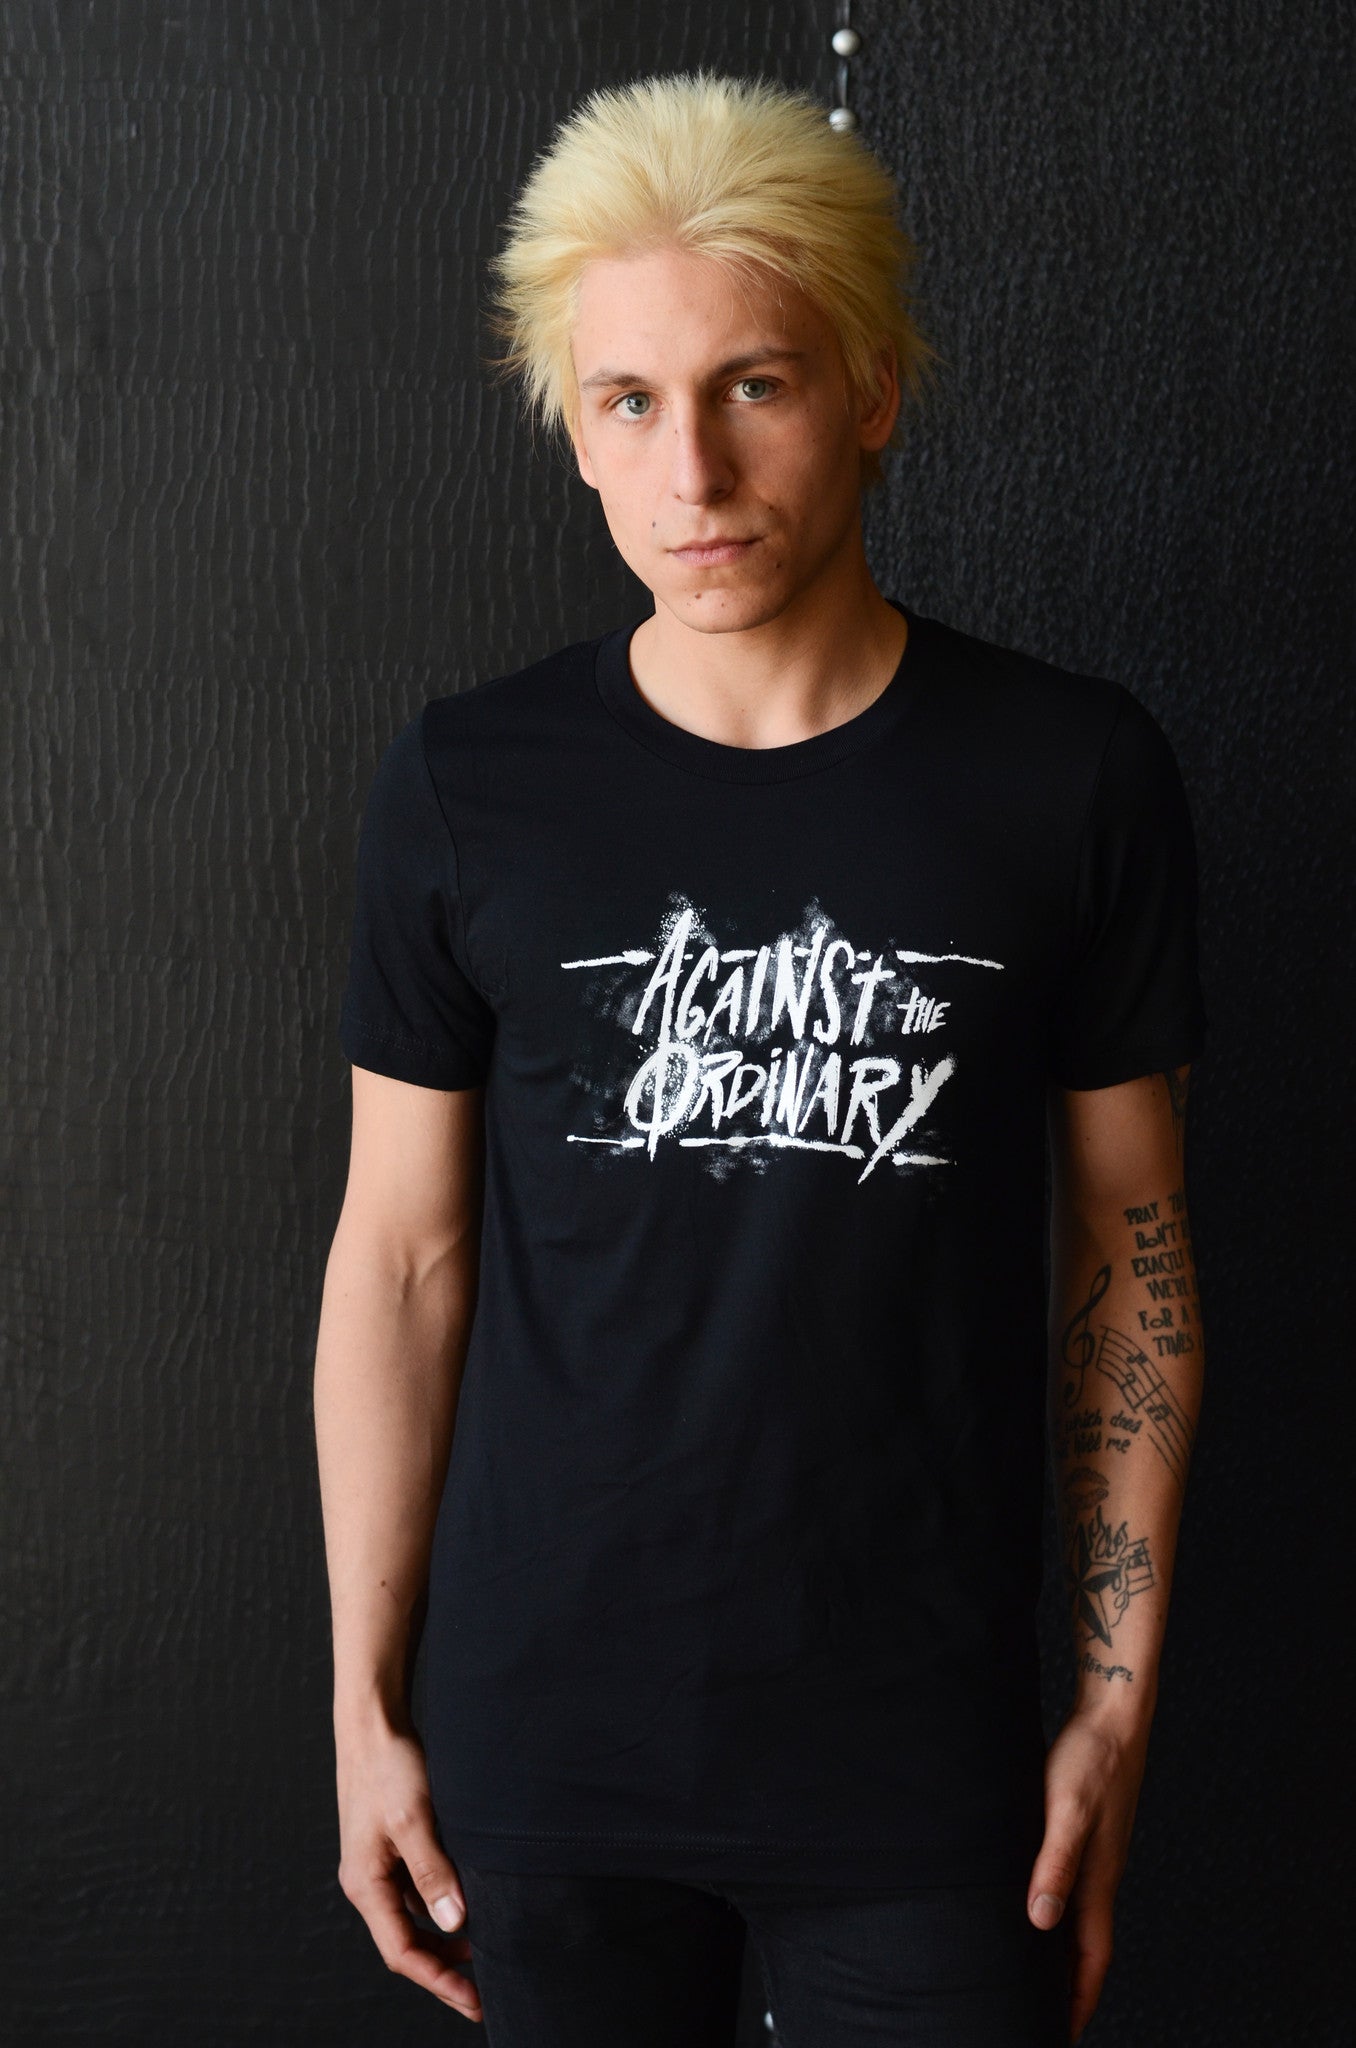 AGAINST THE ORDINARY Men's Band TEE